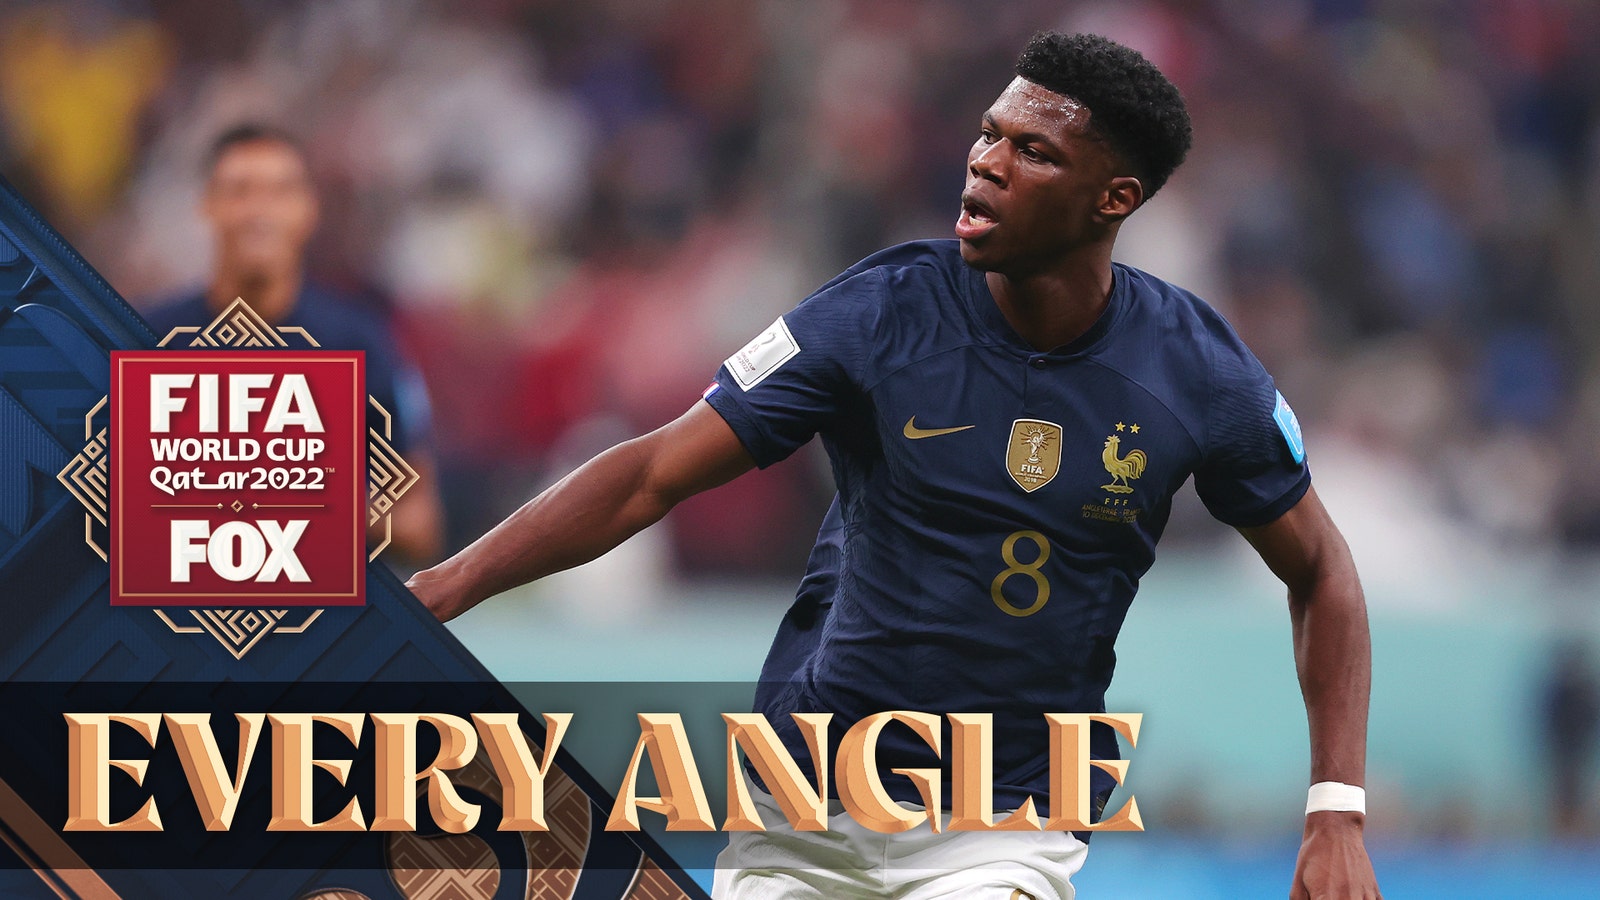 Aurelien Tchouameni makes a STATEMENT after scoring for France in the 2022 FIFA World Cup | Every Angle